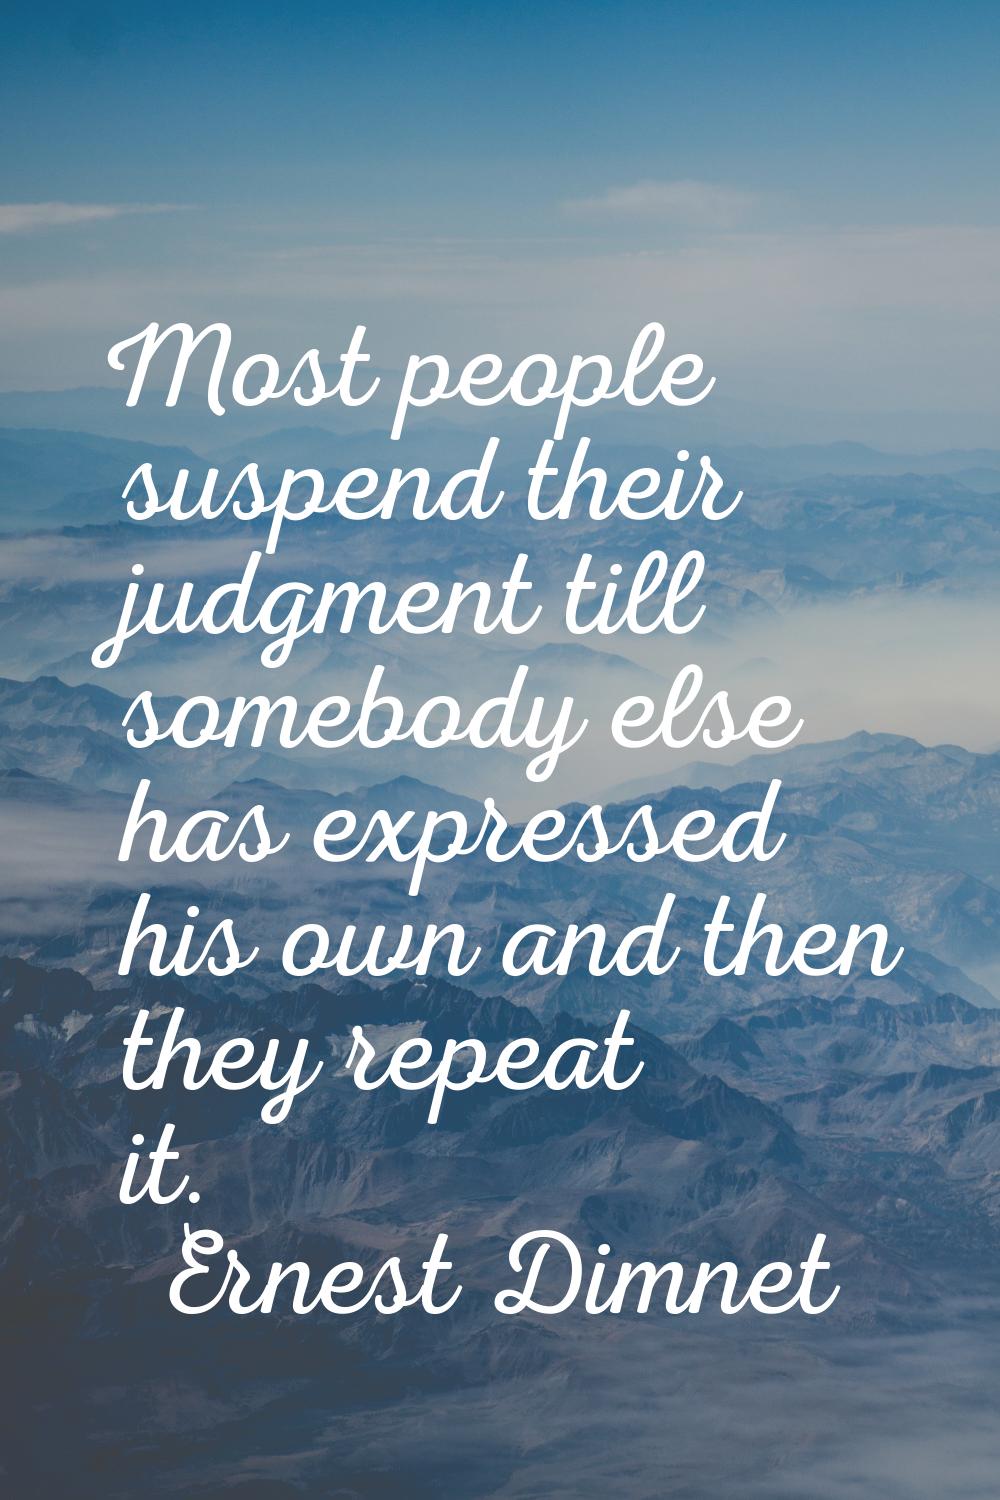 Most people suspend their judgment till somebody else has expressed his own and then they repeat it